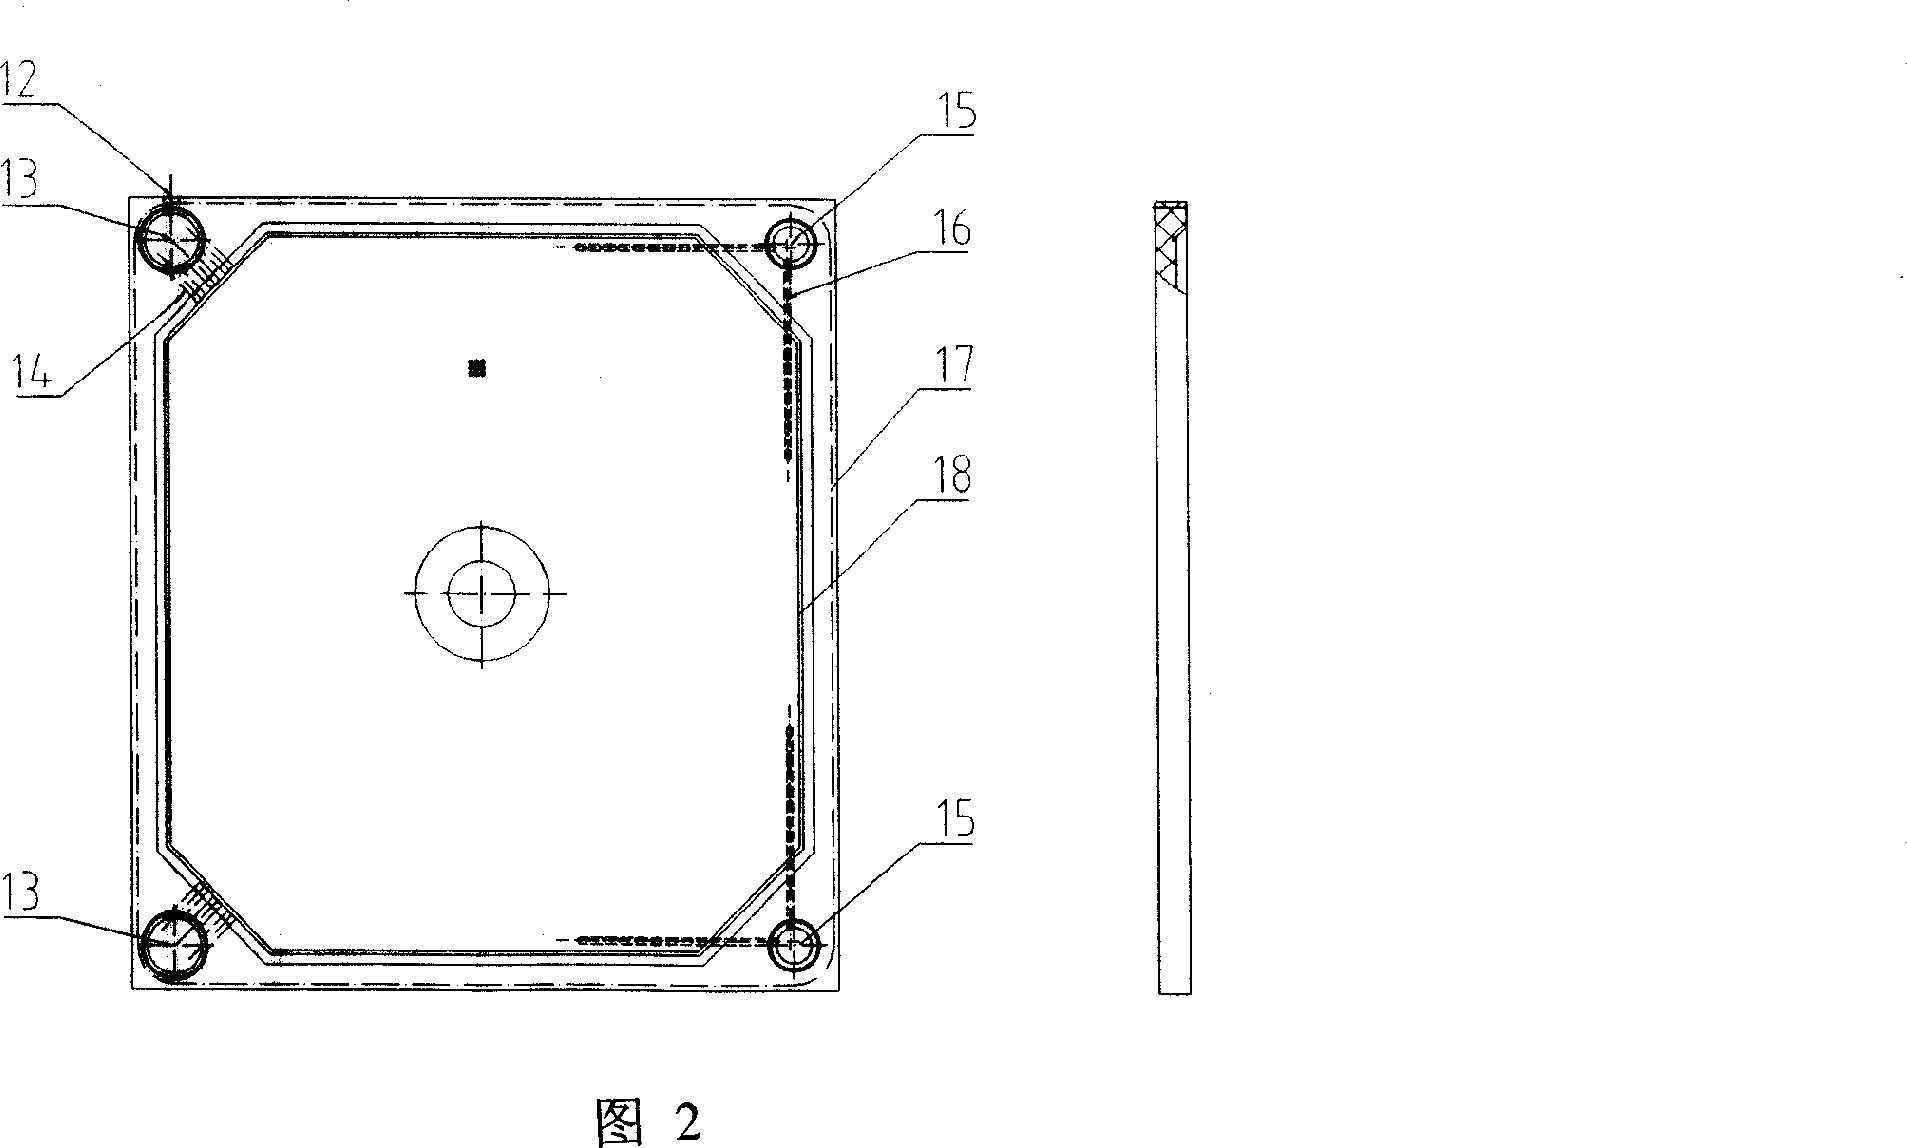 Filter-pressing process for producing malt extract during production of beer